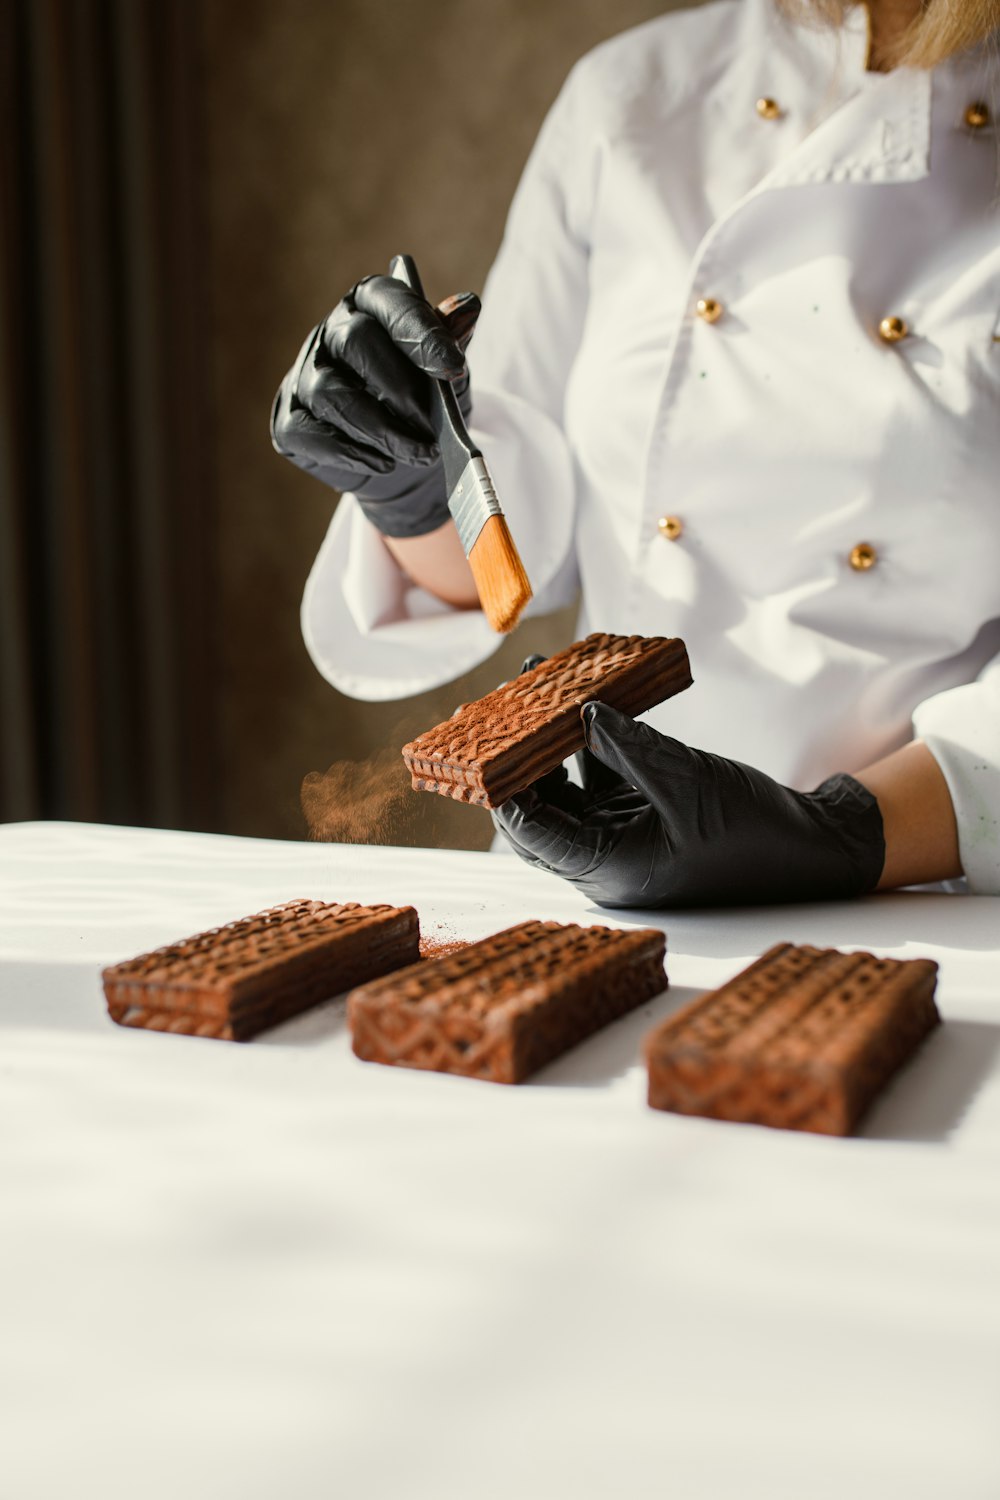 a woman in a chef's uniform is eating waffles